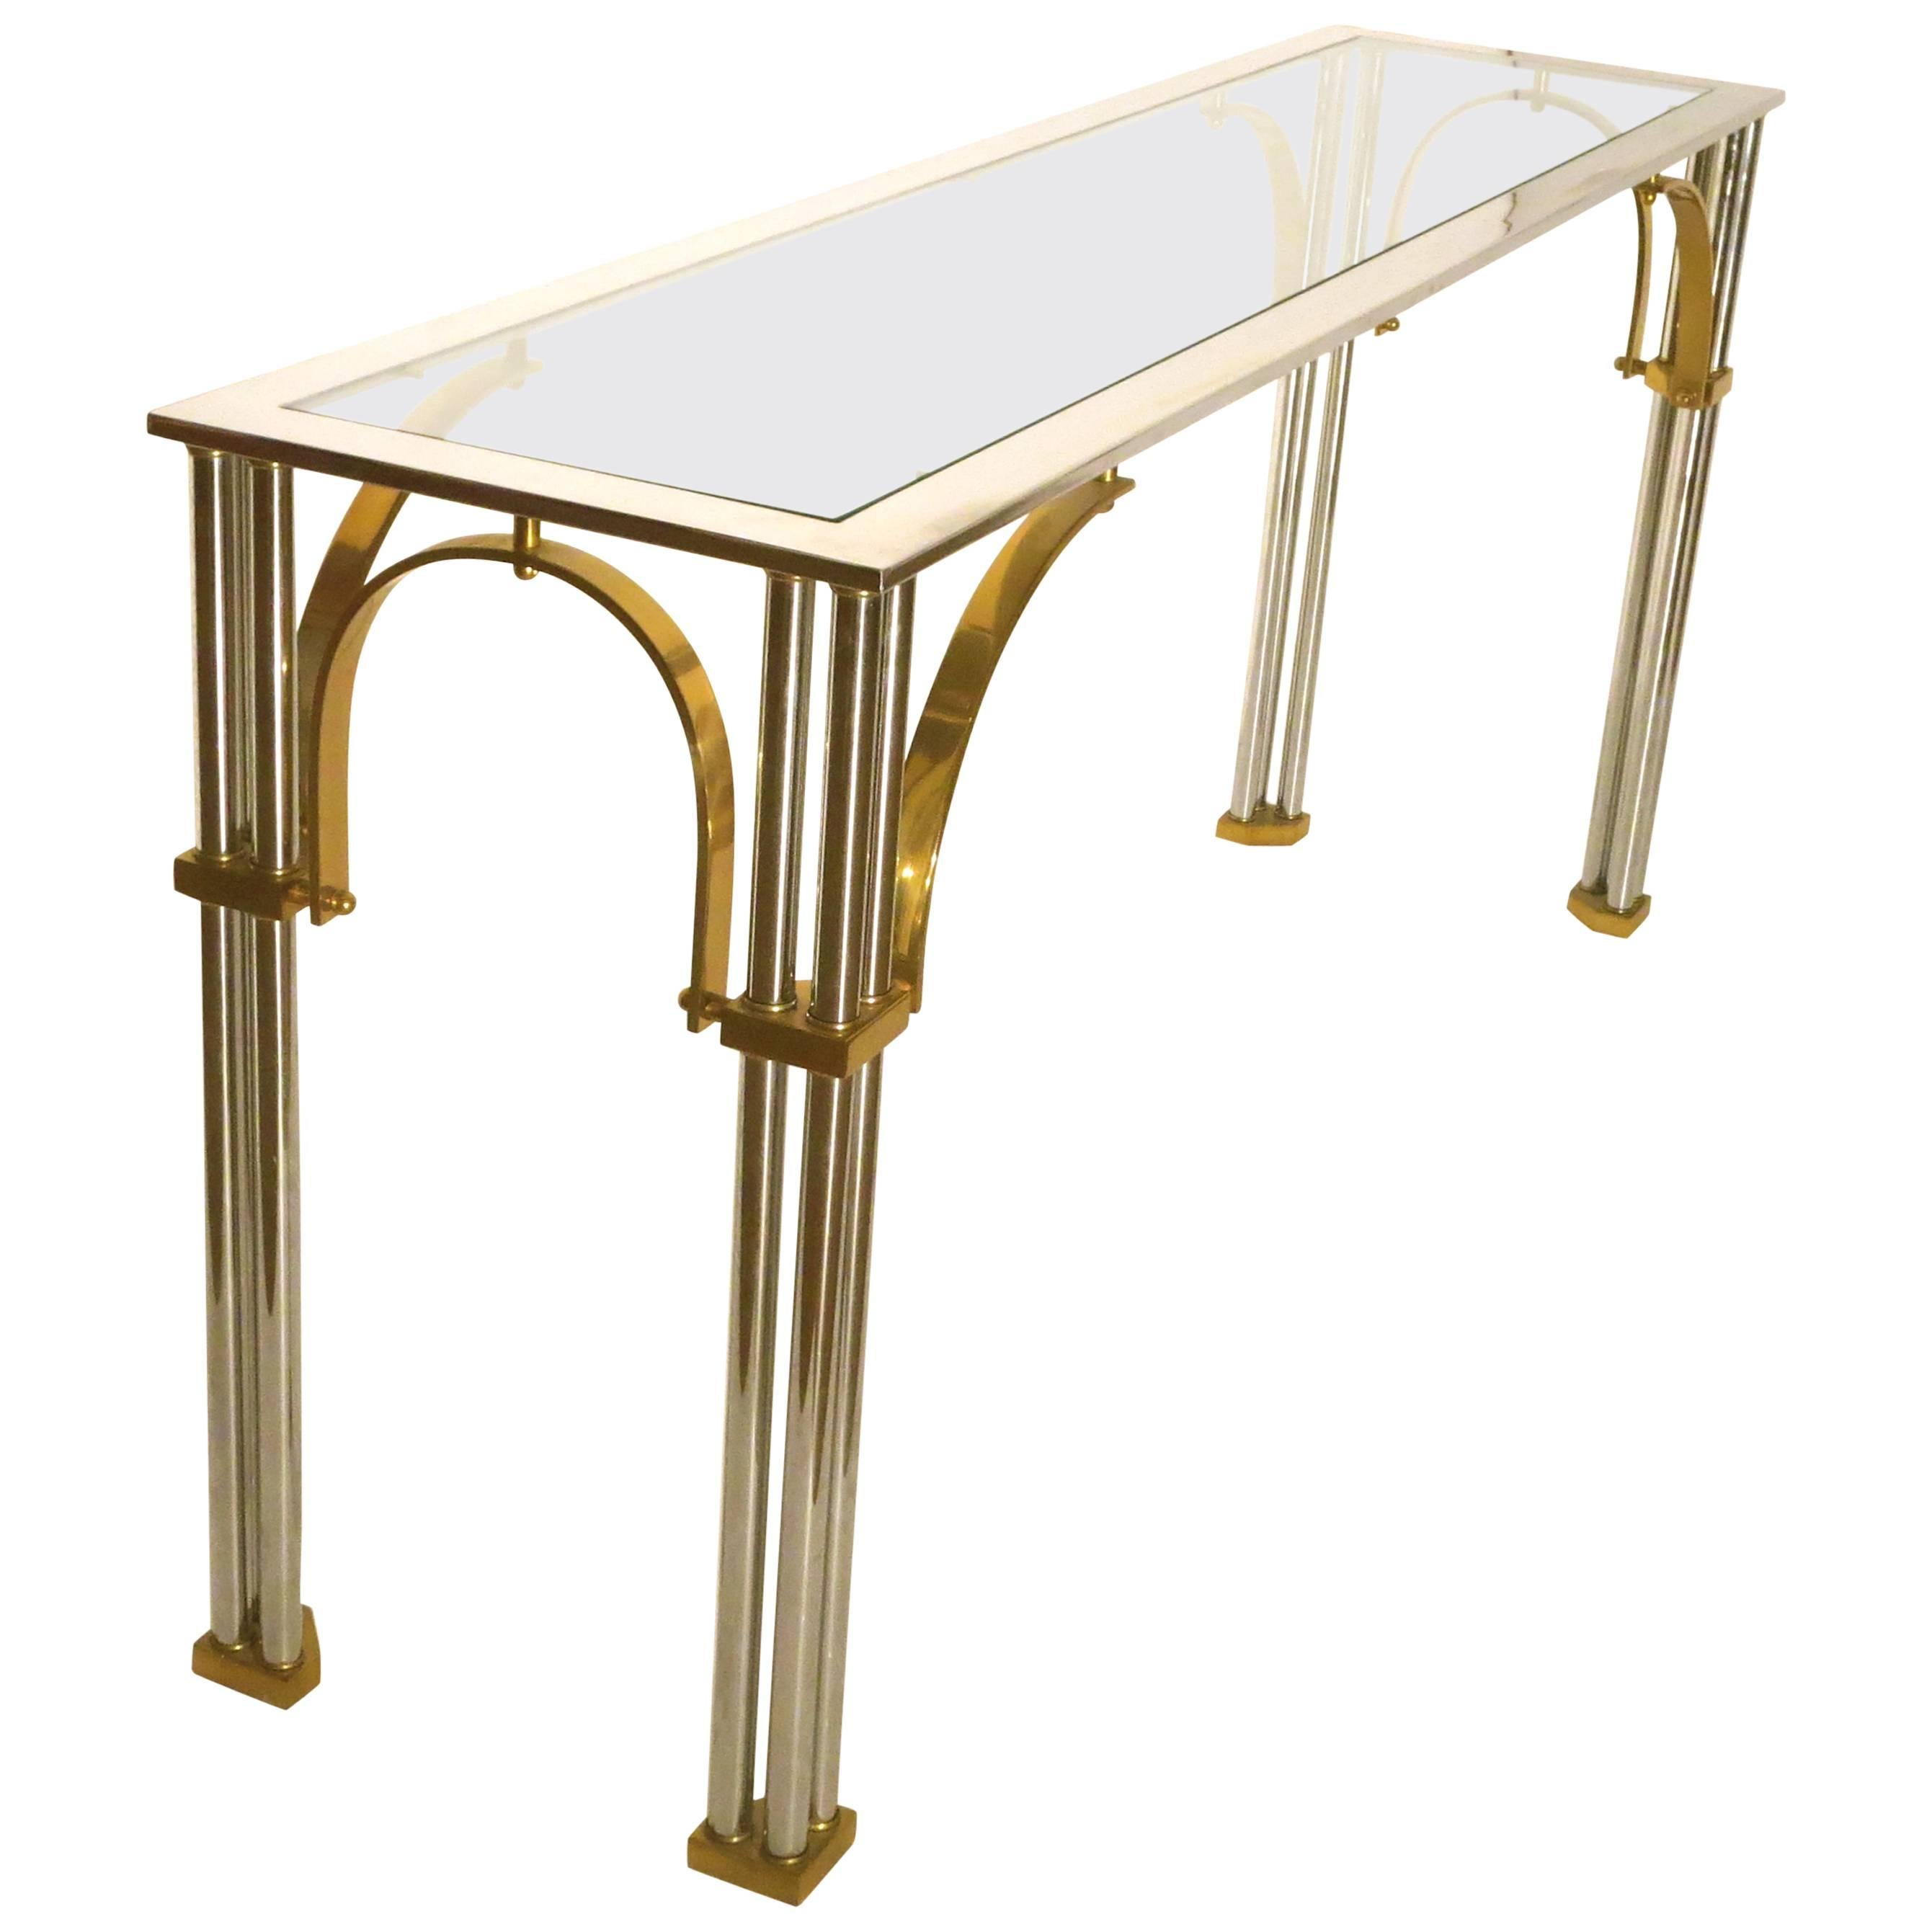 Striking Chrome and Brass with Glass Top Console or Sofa Table by Milo Baughman